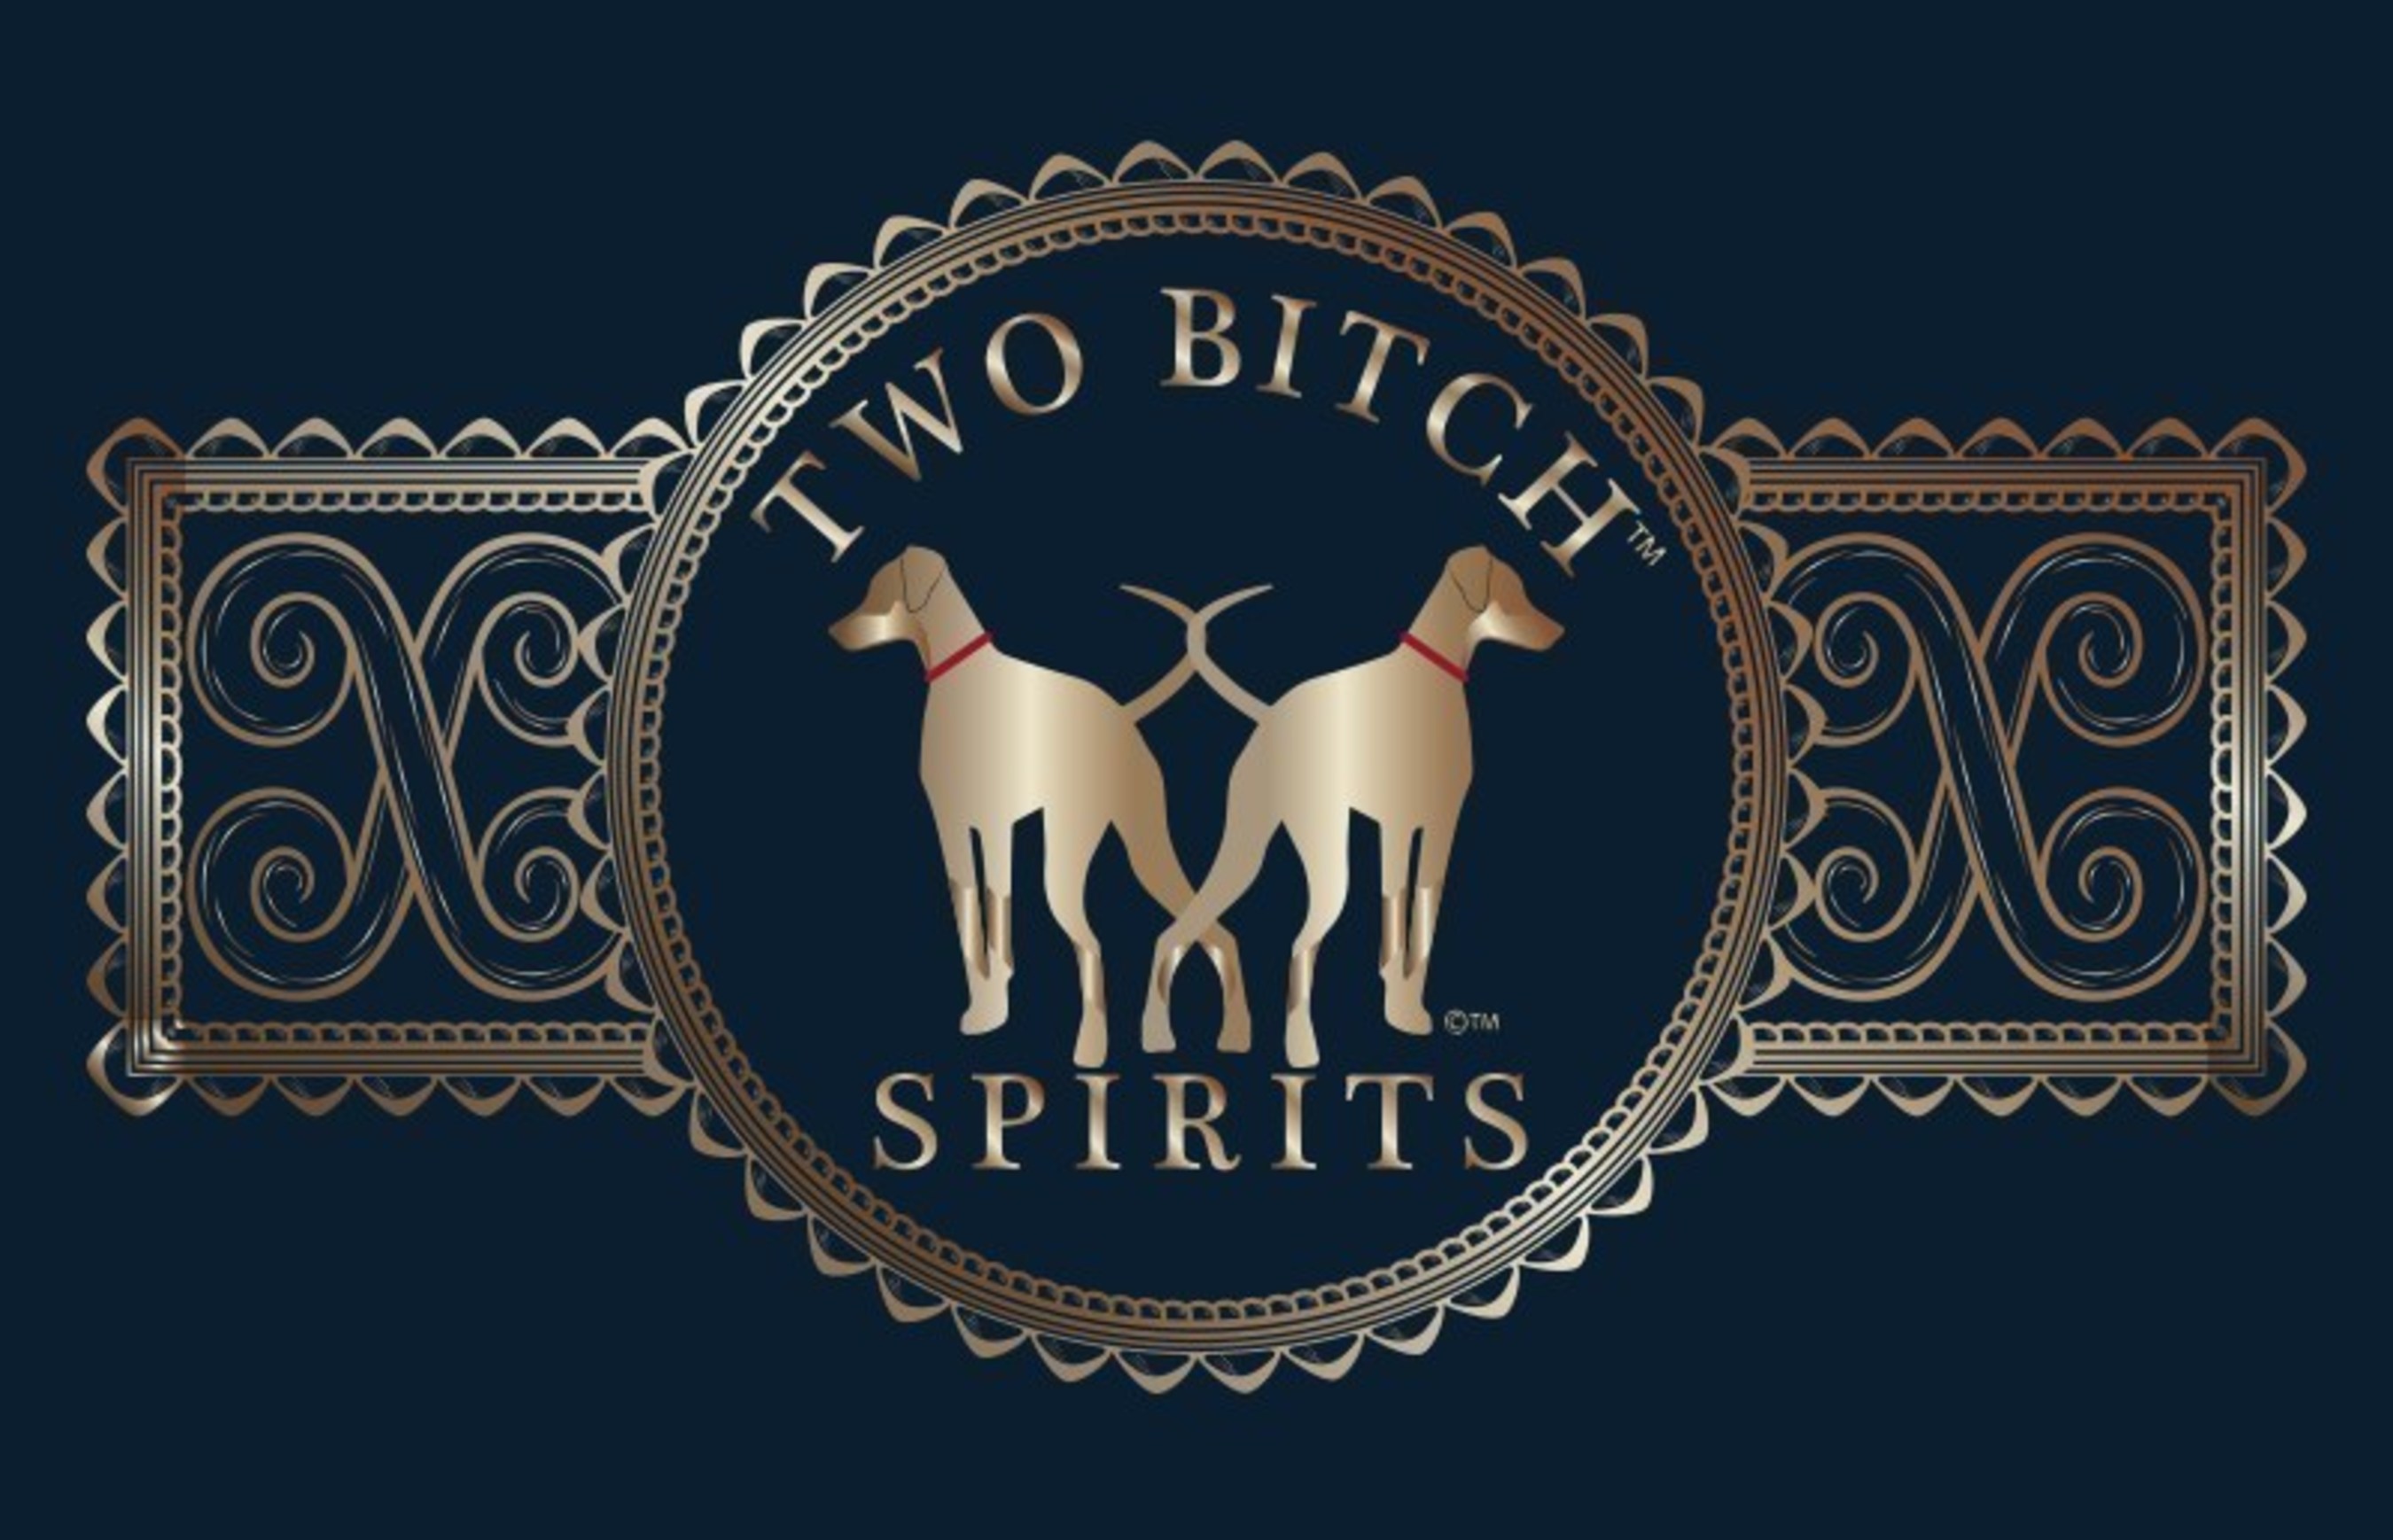 For the love of dogs, bourbon, and good times! Get Two Bitch Bourbon gear at https://igg.me/at/twobitchbourbon.